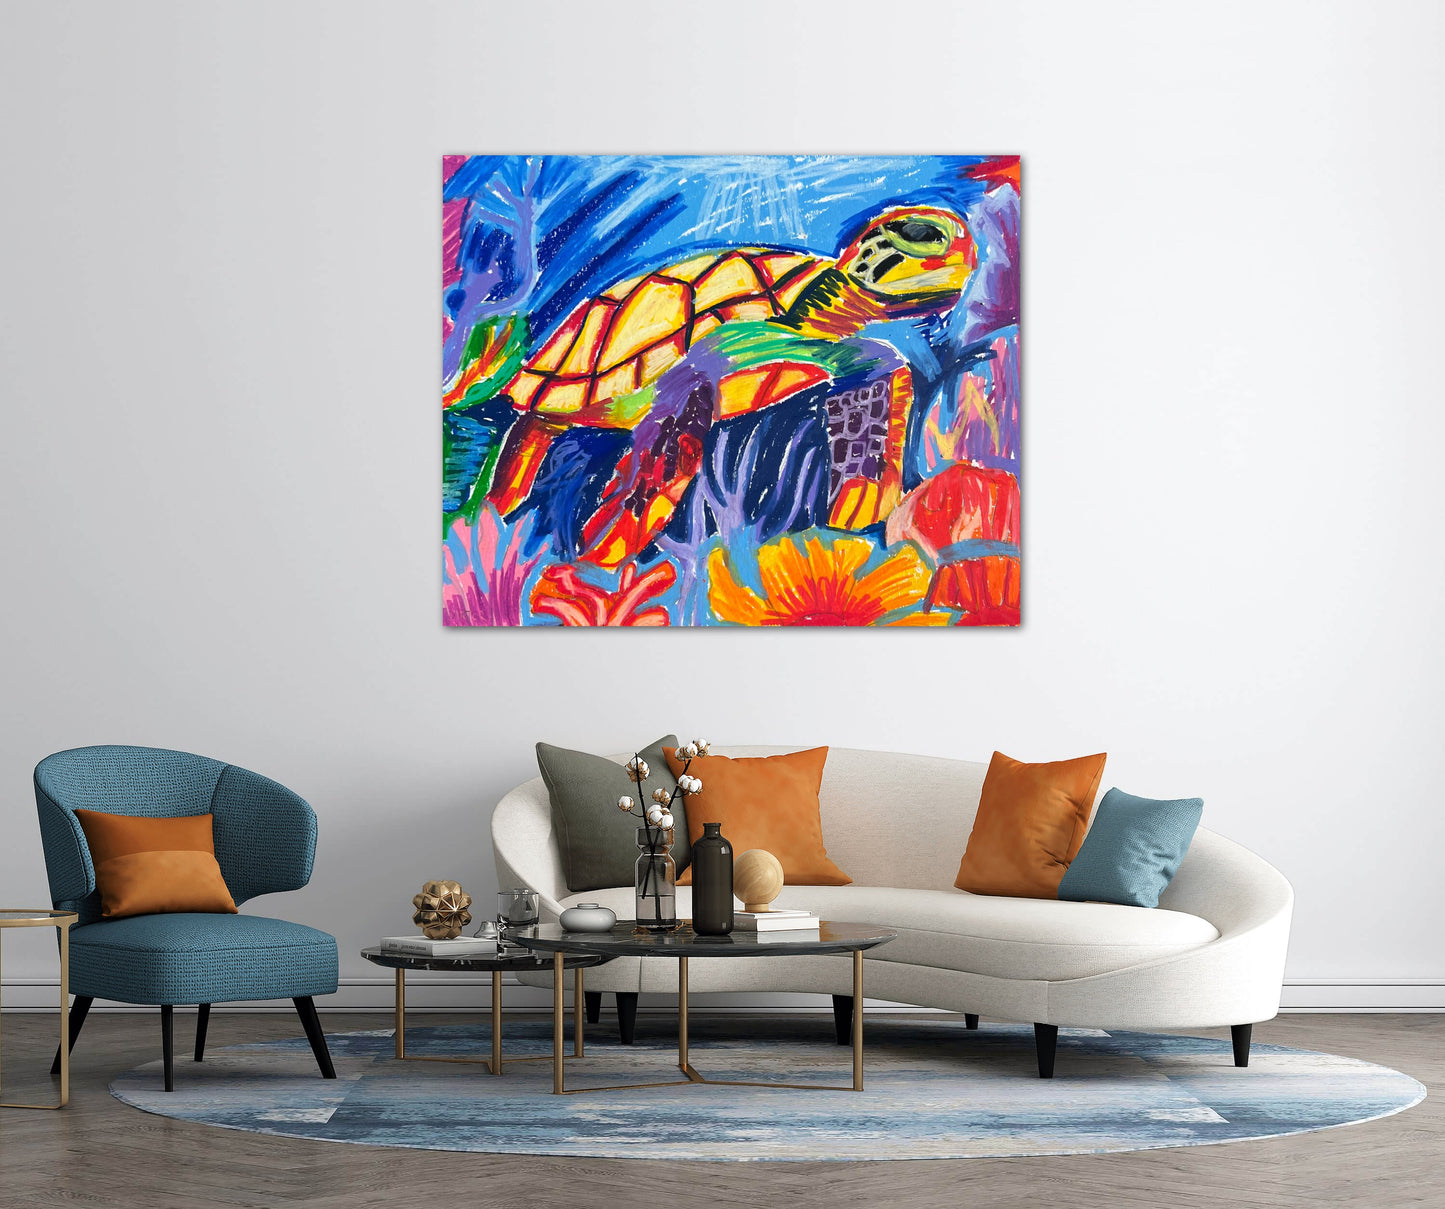 Under The Sea - Print, Poster, Stretched Canvas Print